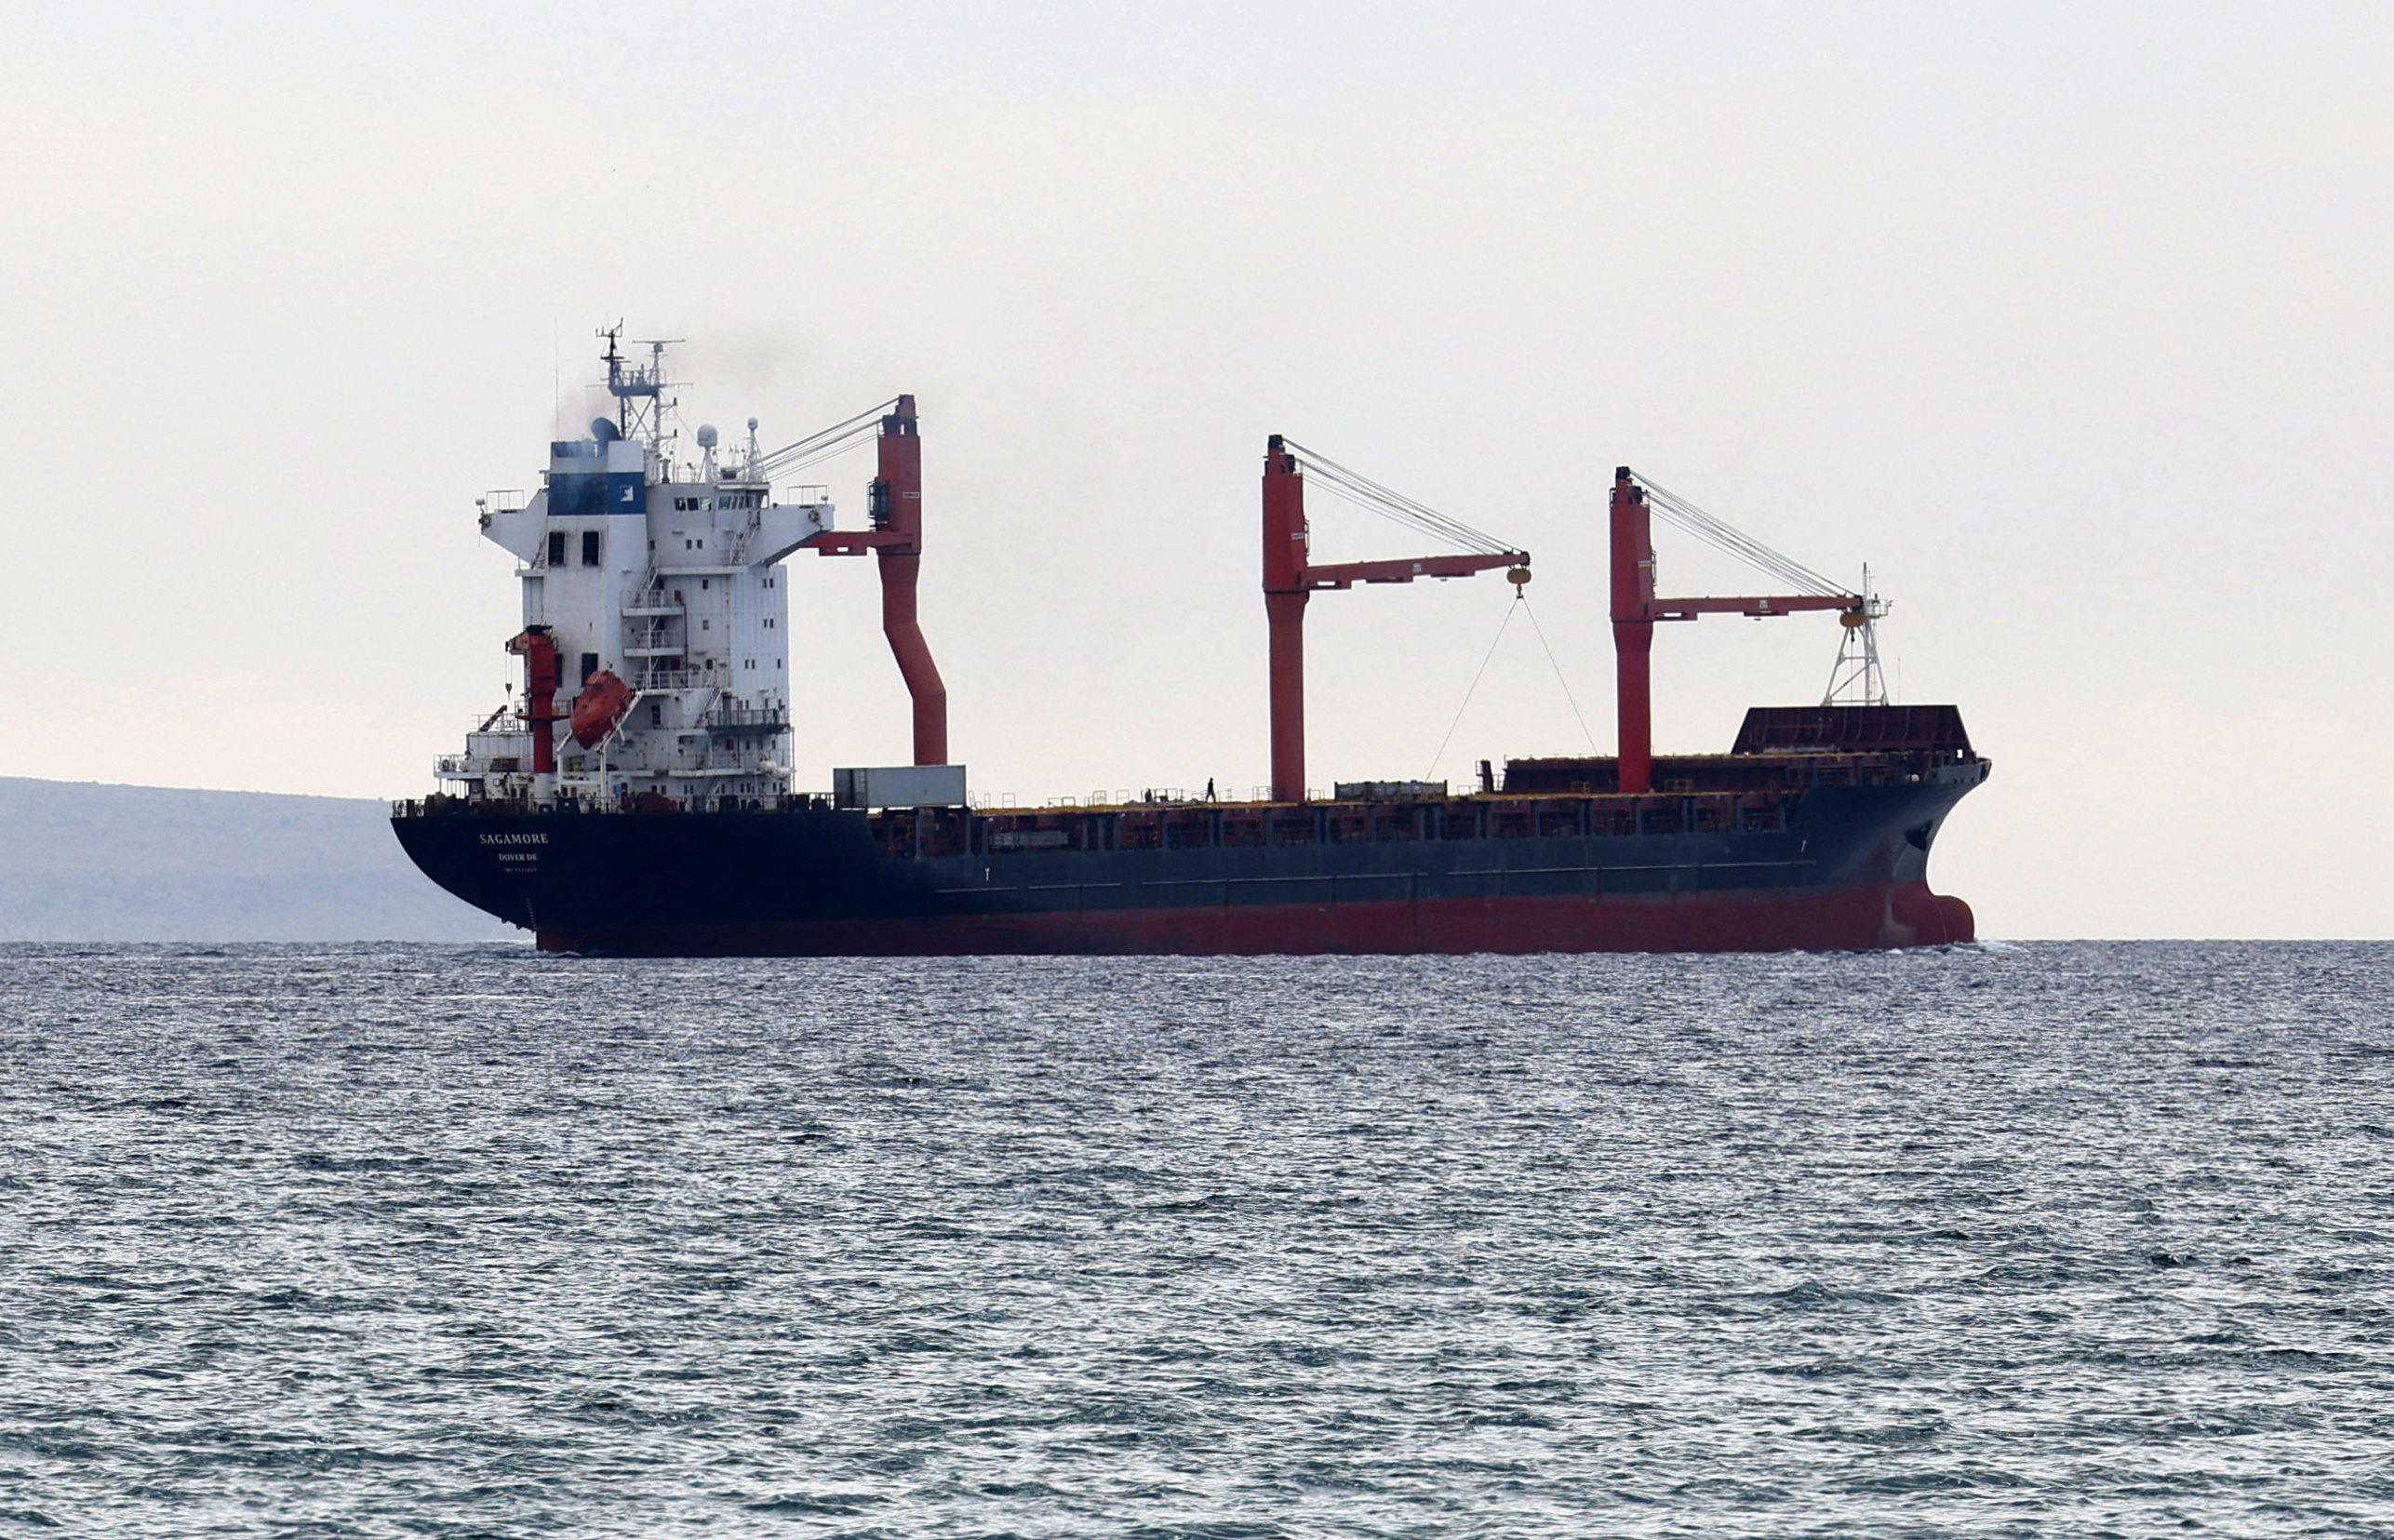 U.S. flagged cargo vessel carrying aid to a pier built by the U.S. off Gaza sets sail from Larnaca